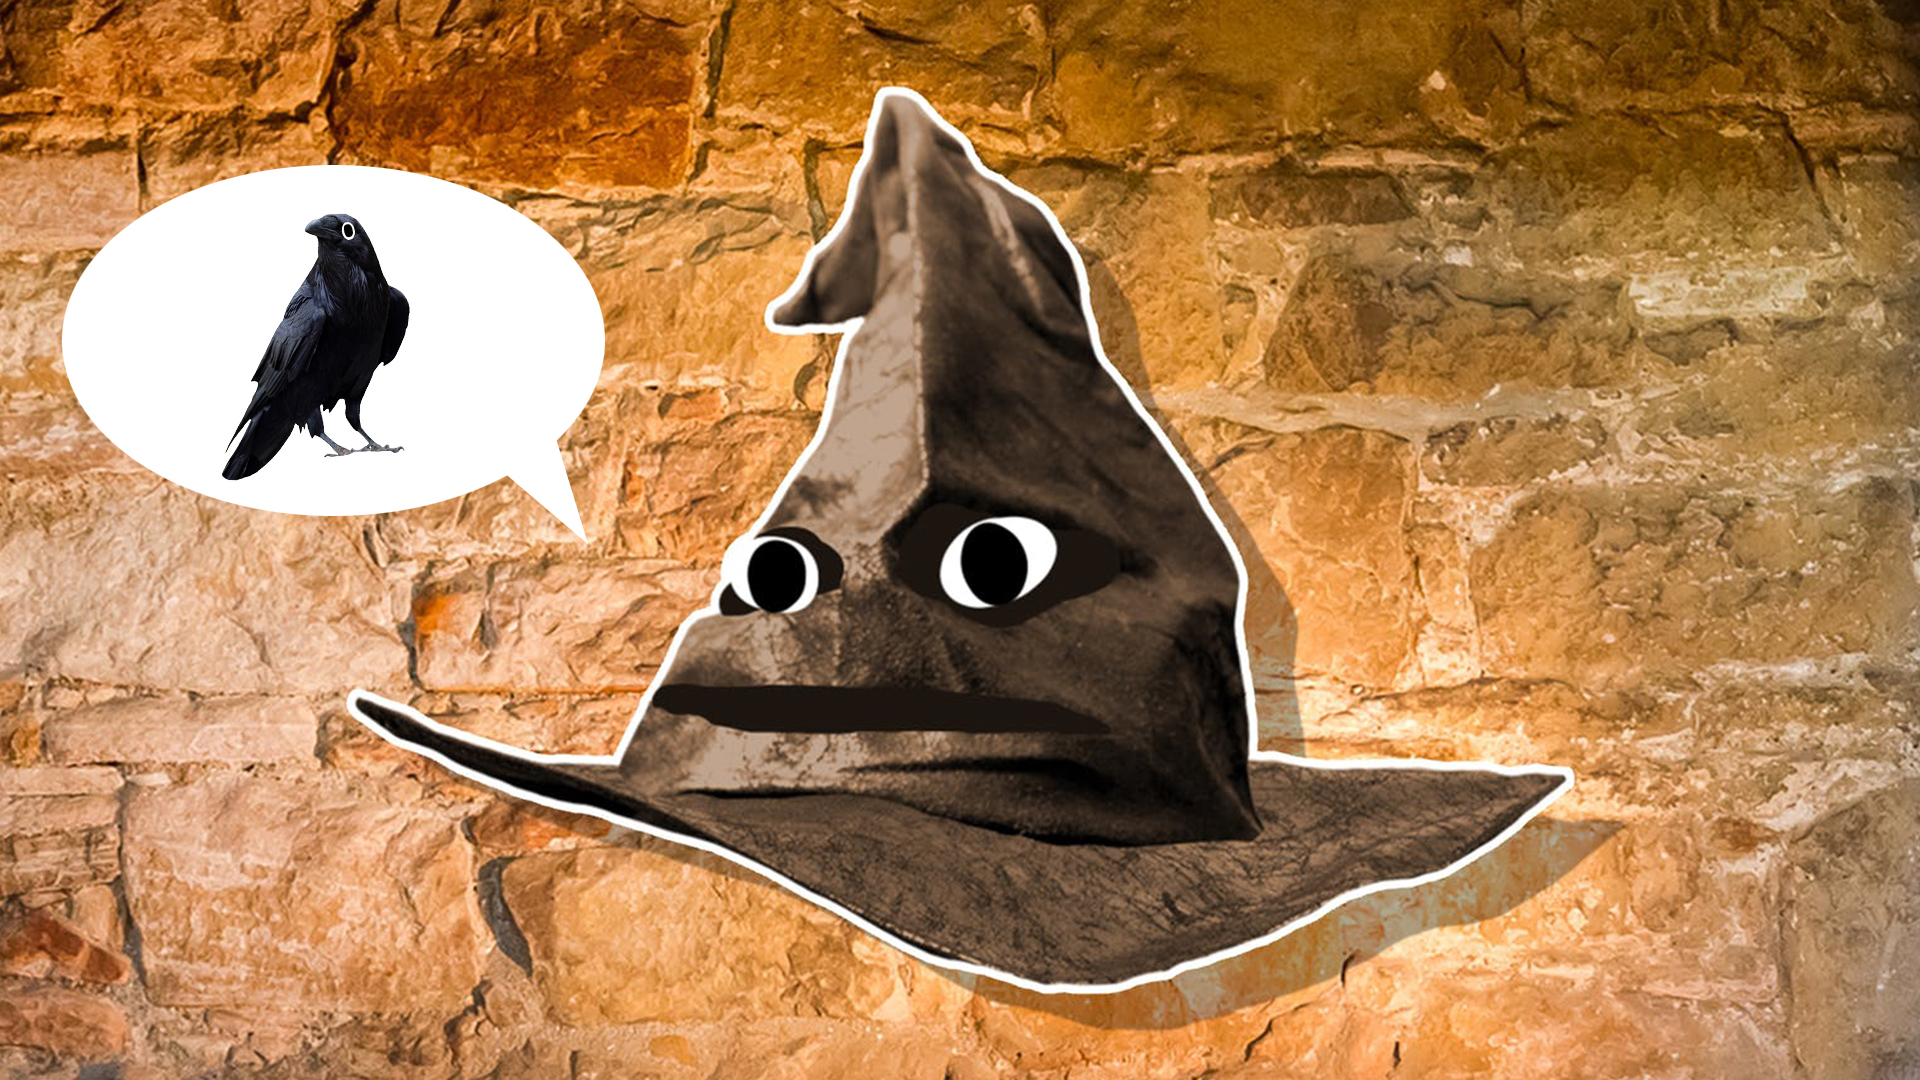 The sorting hat